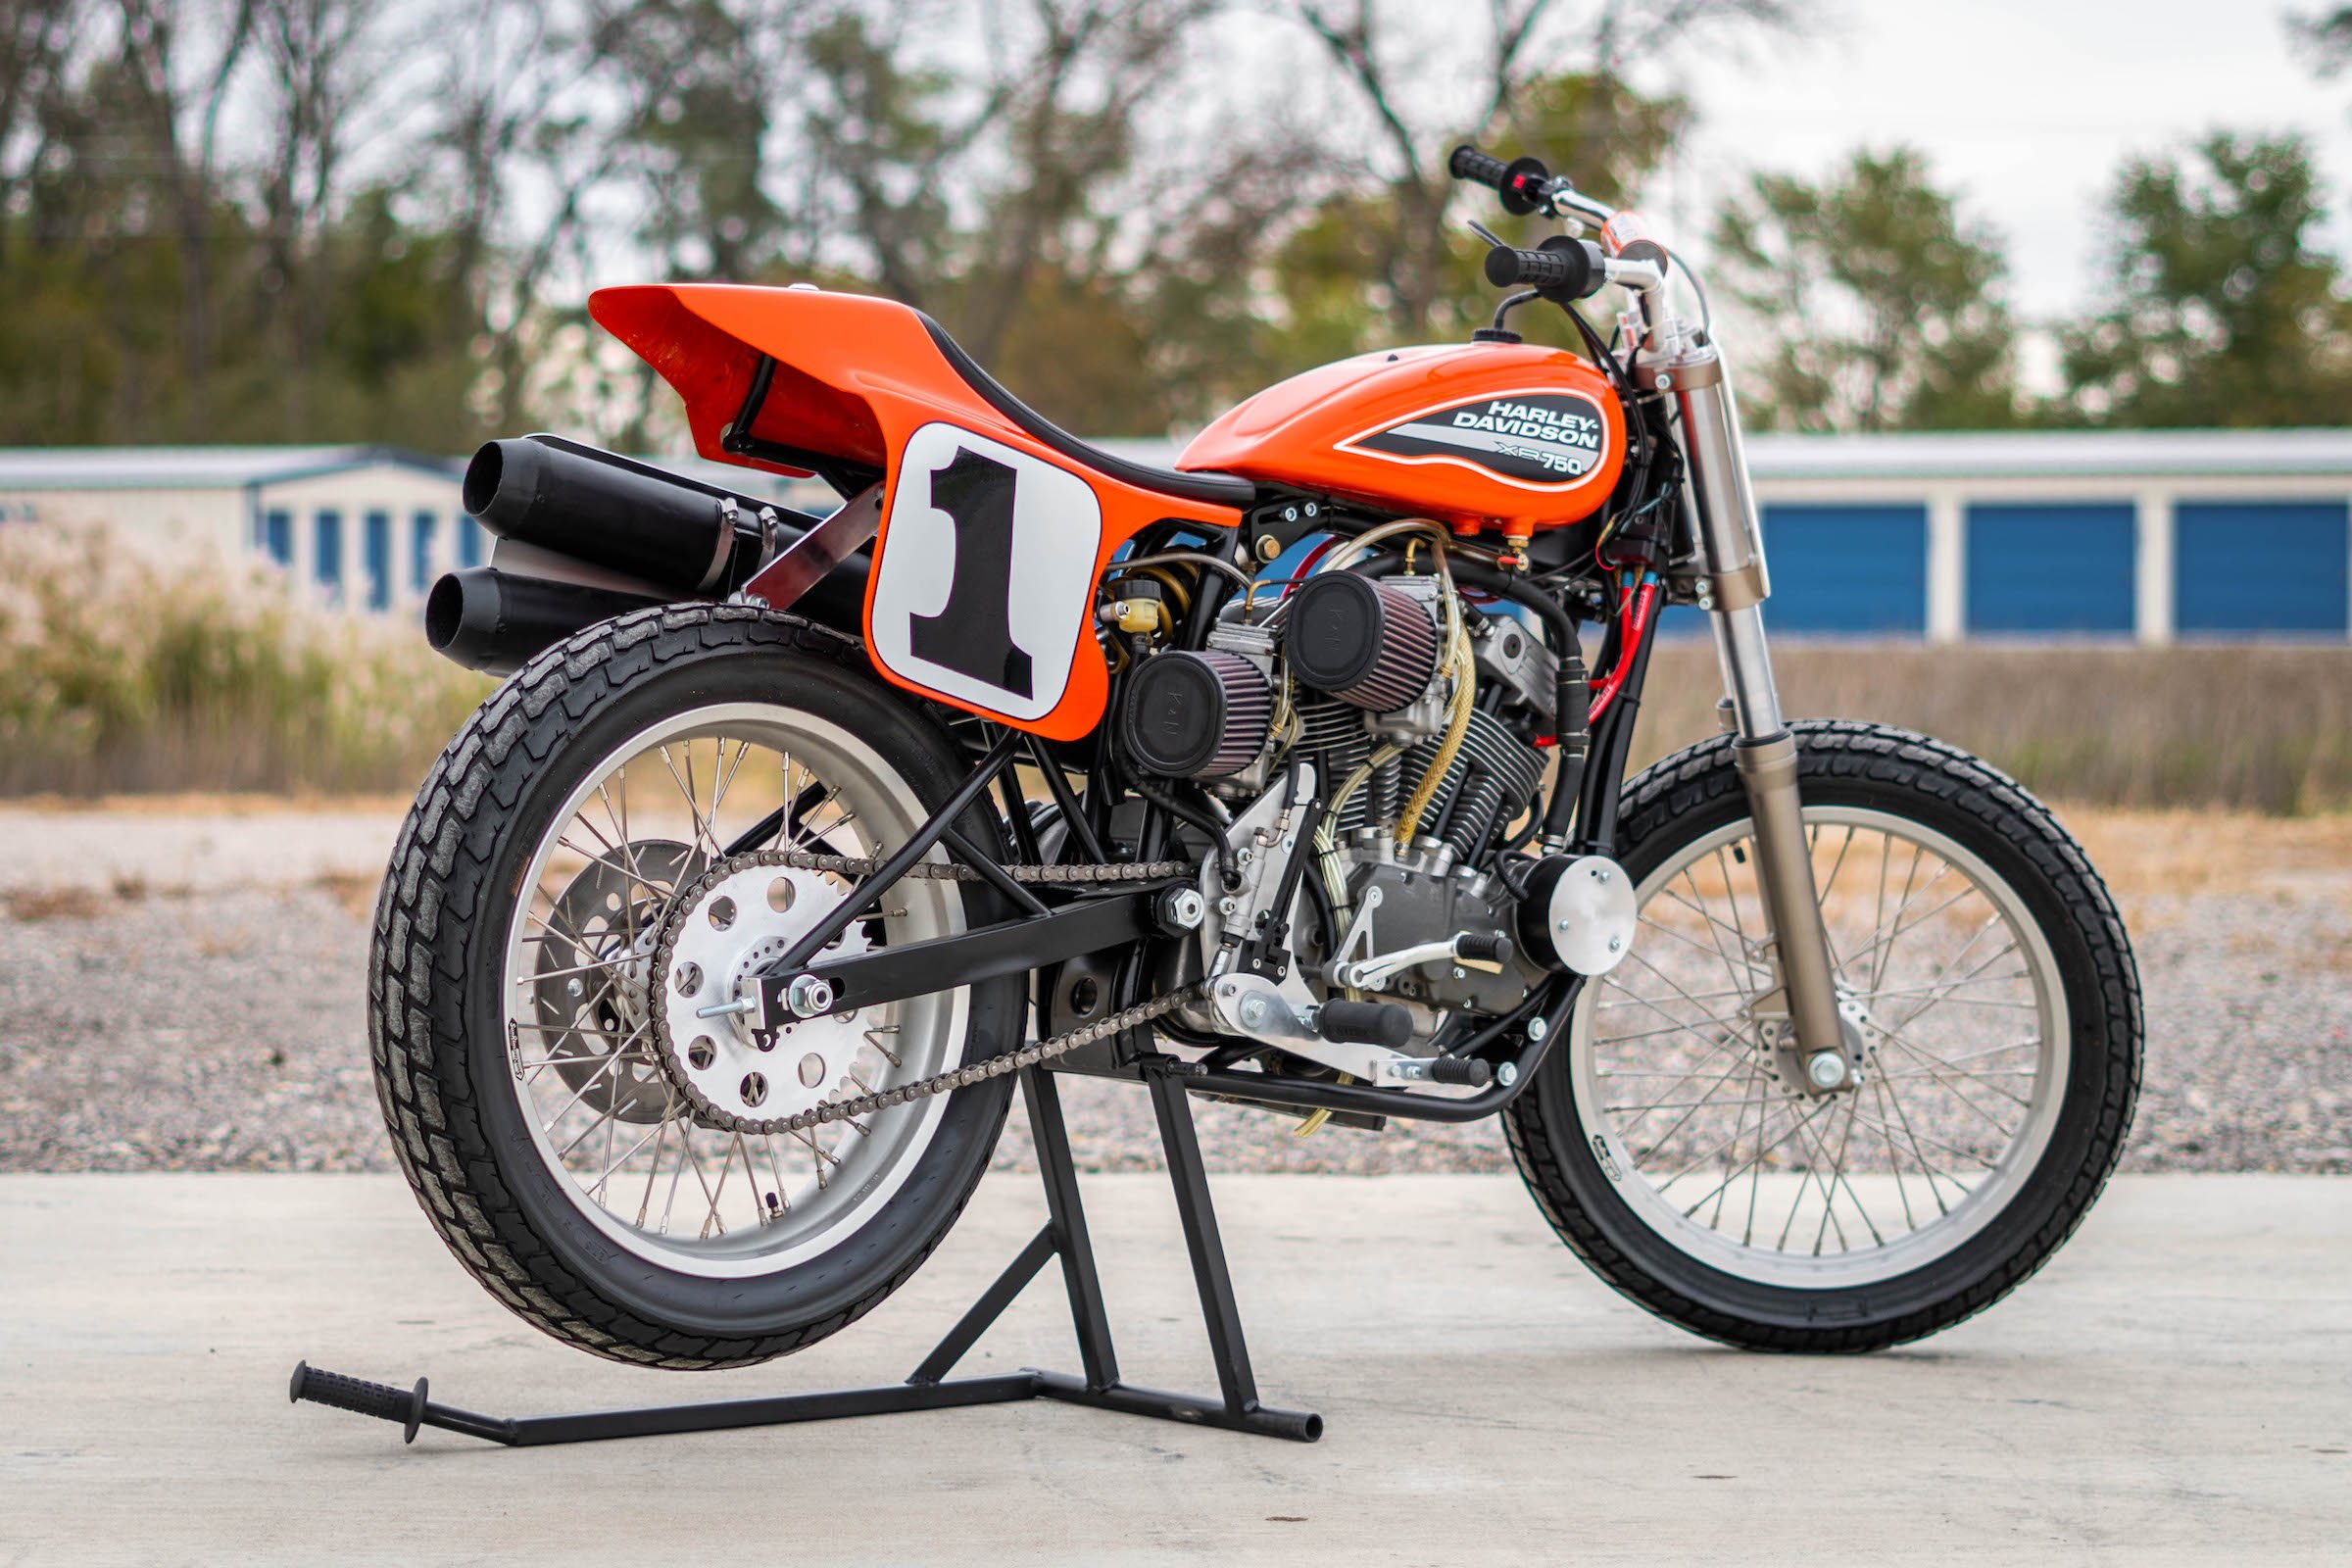  Harley Davidson XR750 A Restored Racer Ready For The 